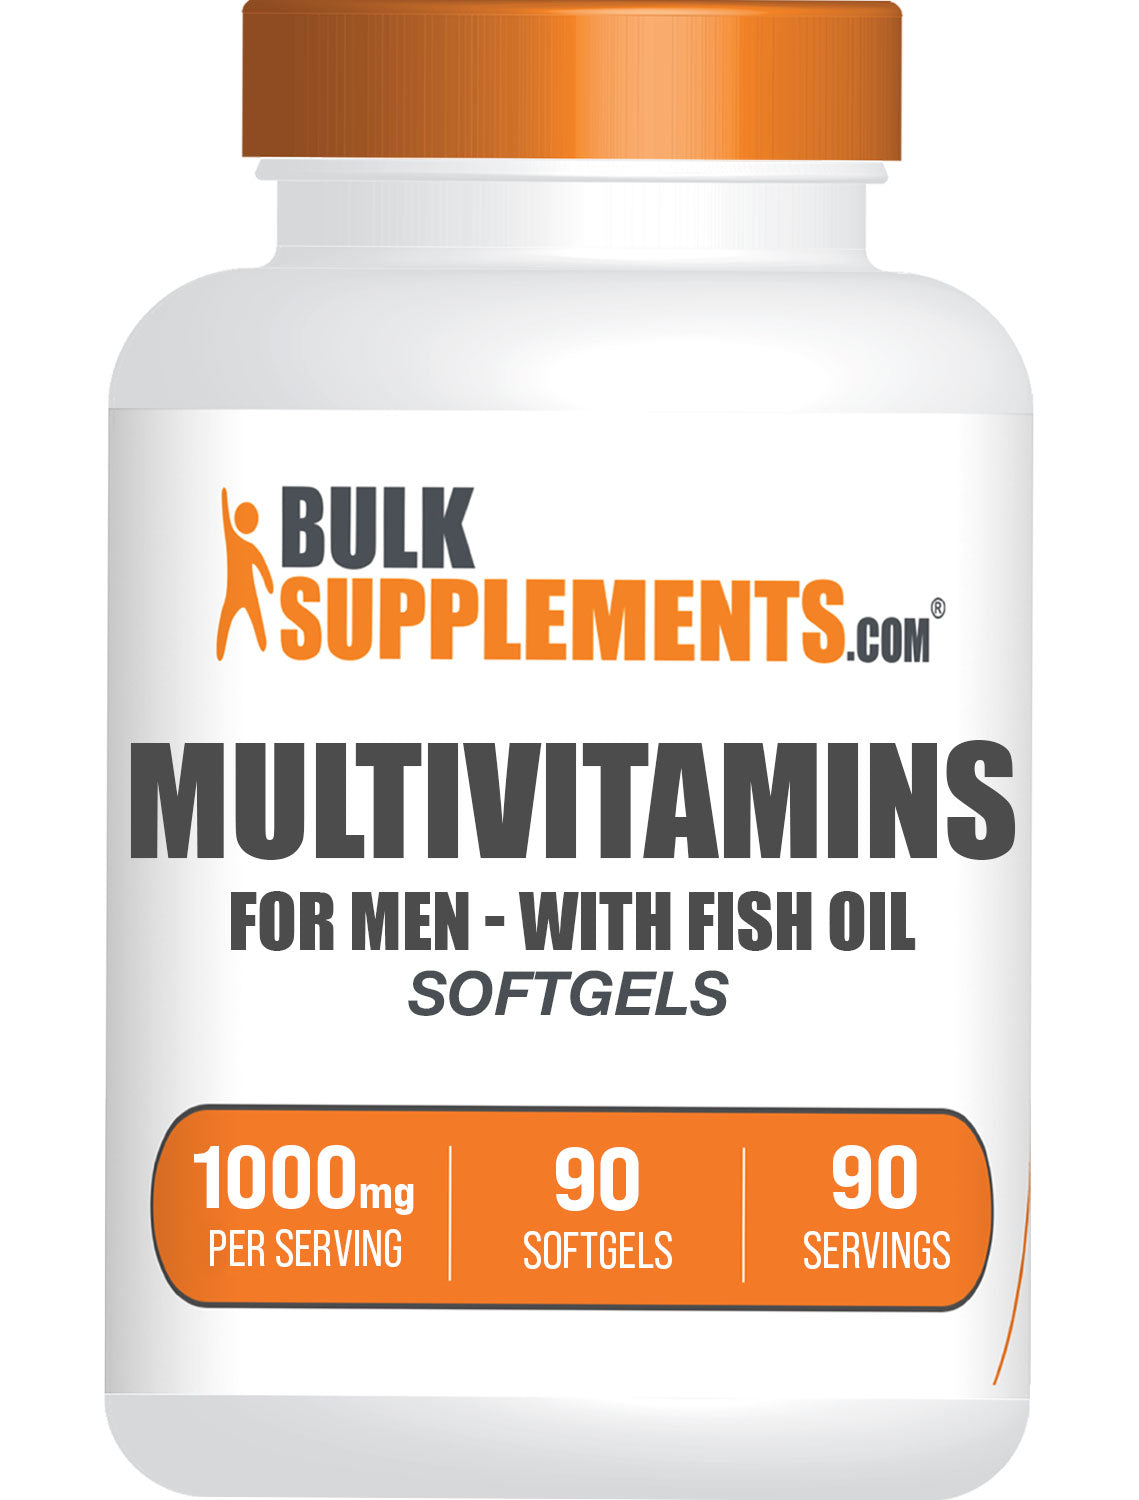 Multivitamins for men with fish oil 1000mg